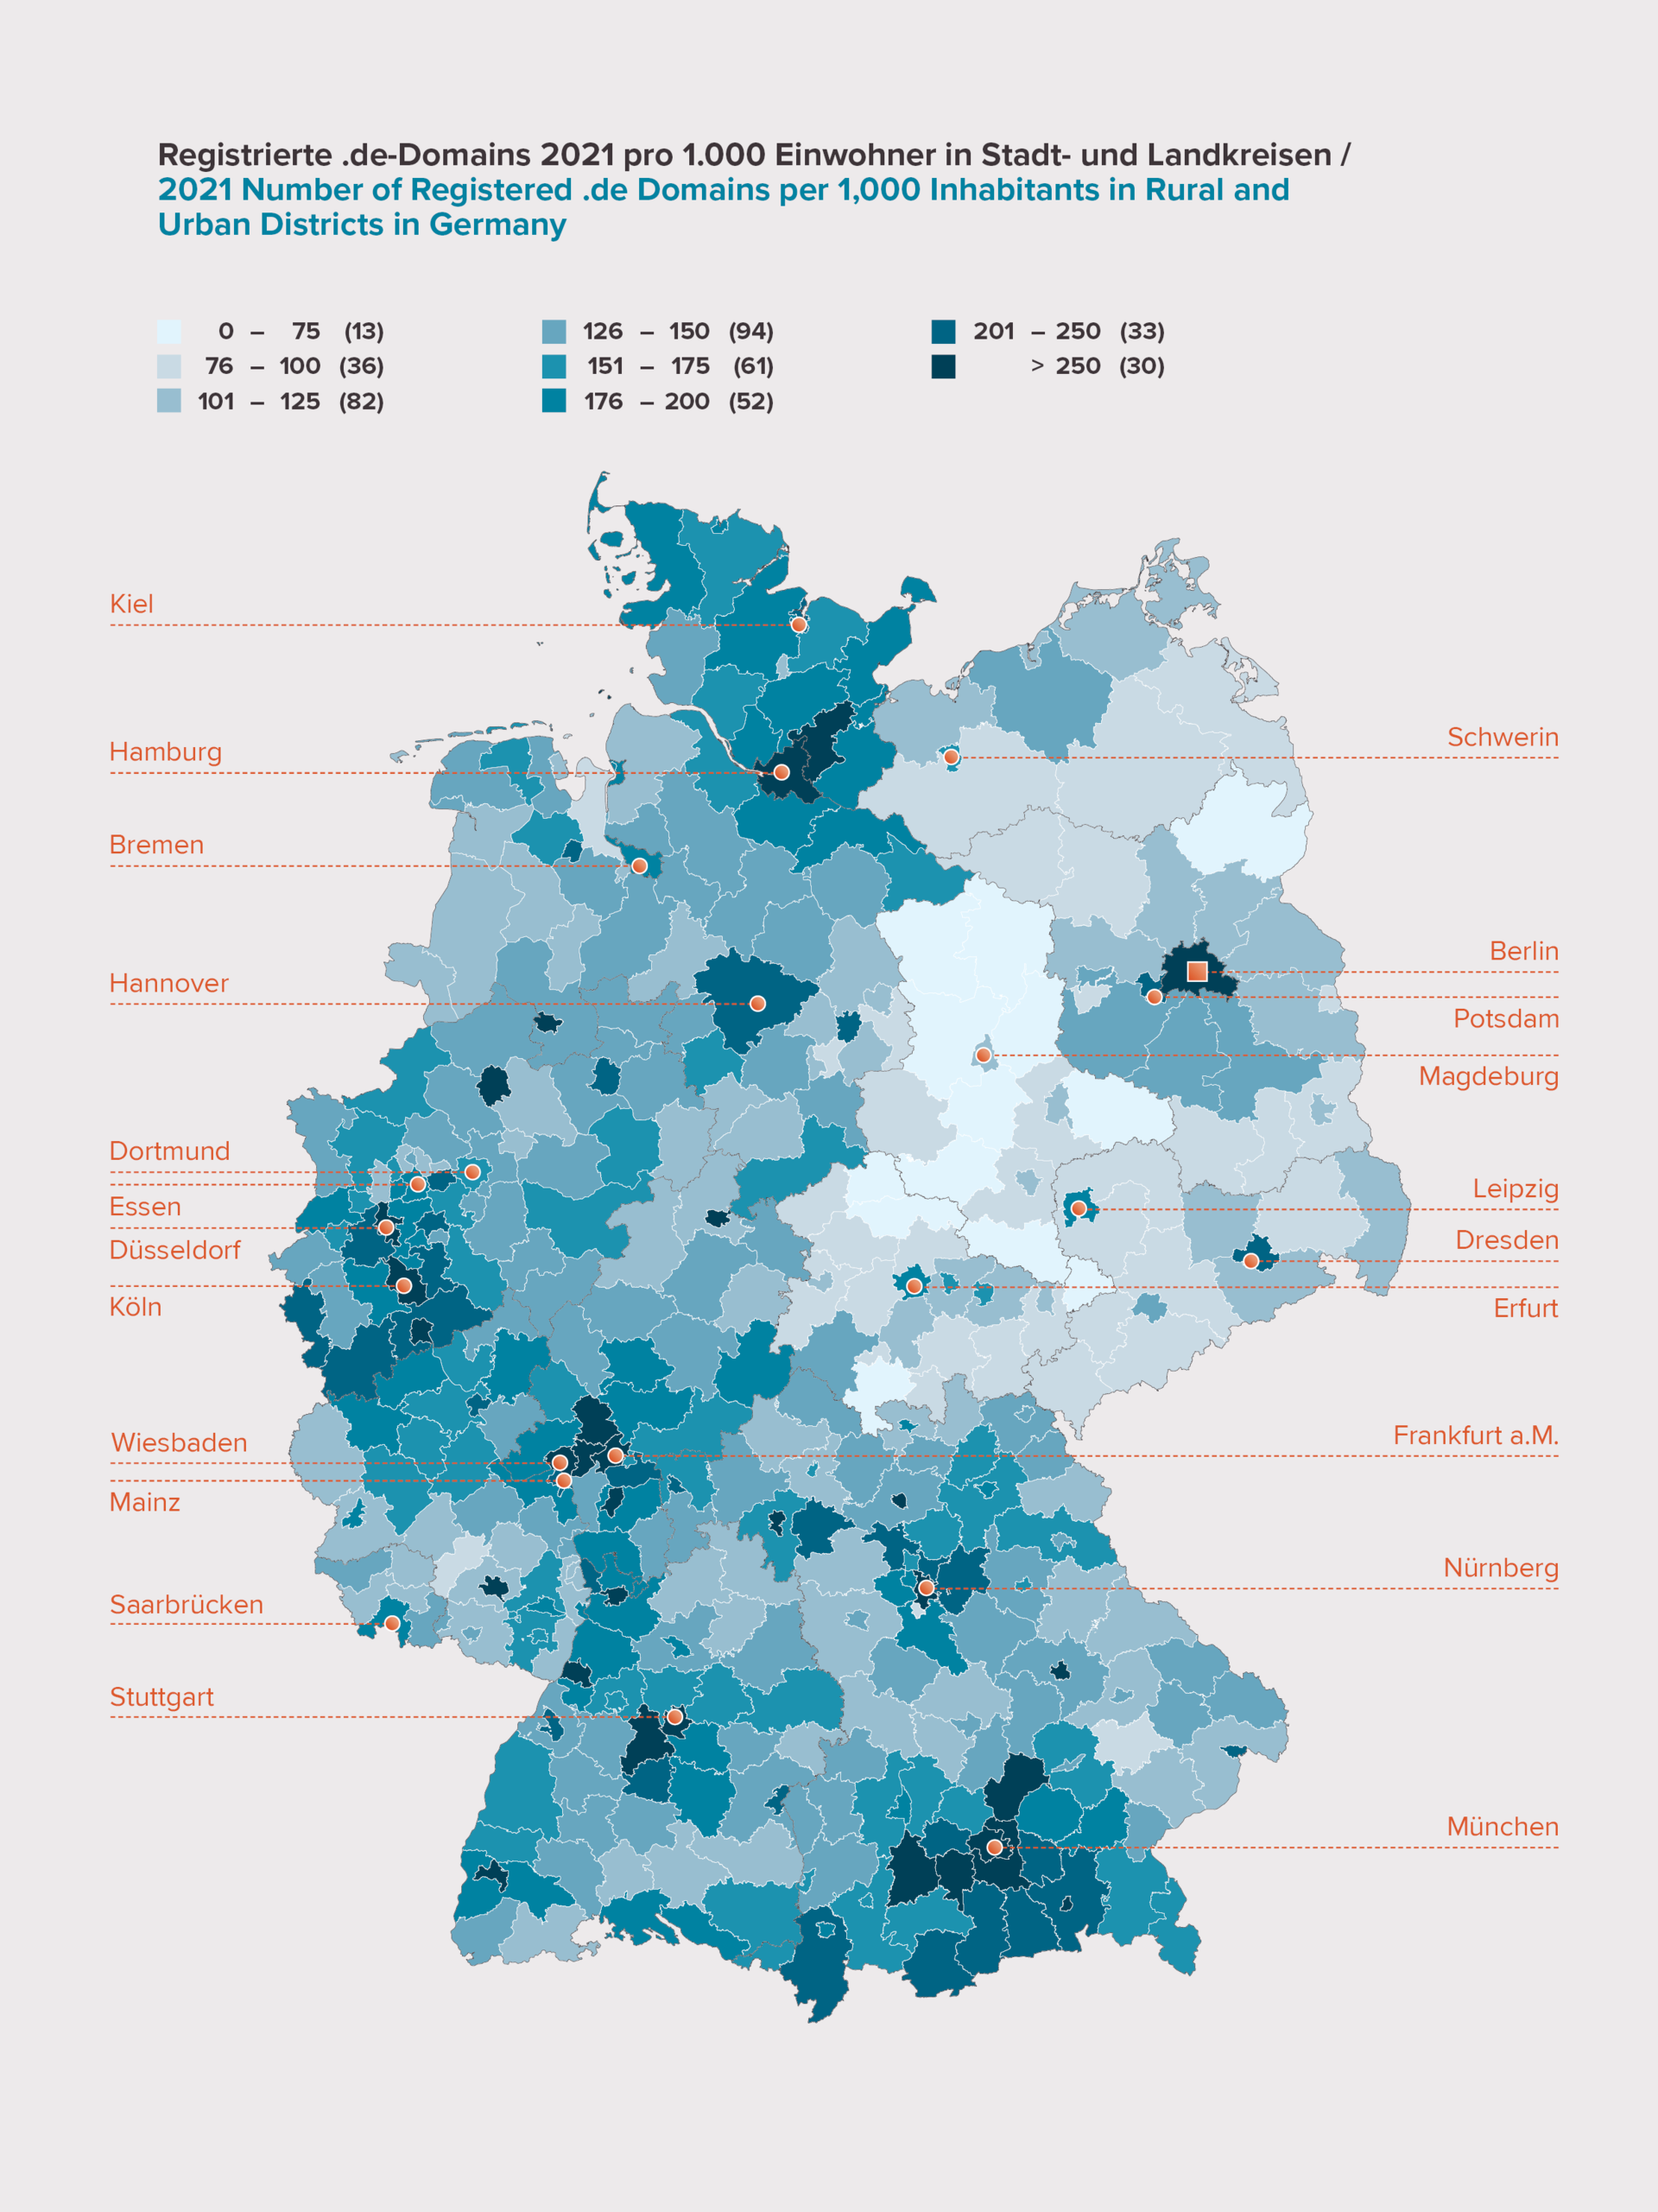 Number of Registered .de Domains per 1,000 Inhabitants in Rural and Urban District in Germany 2021